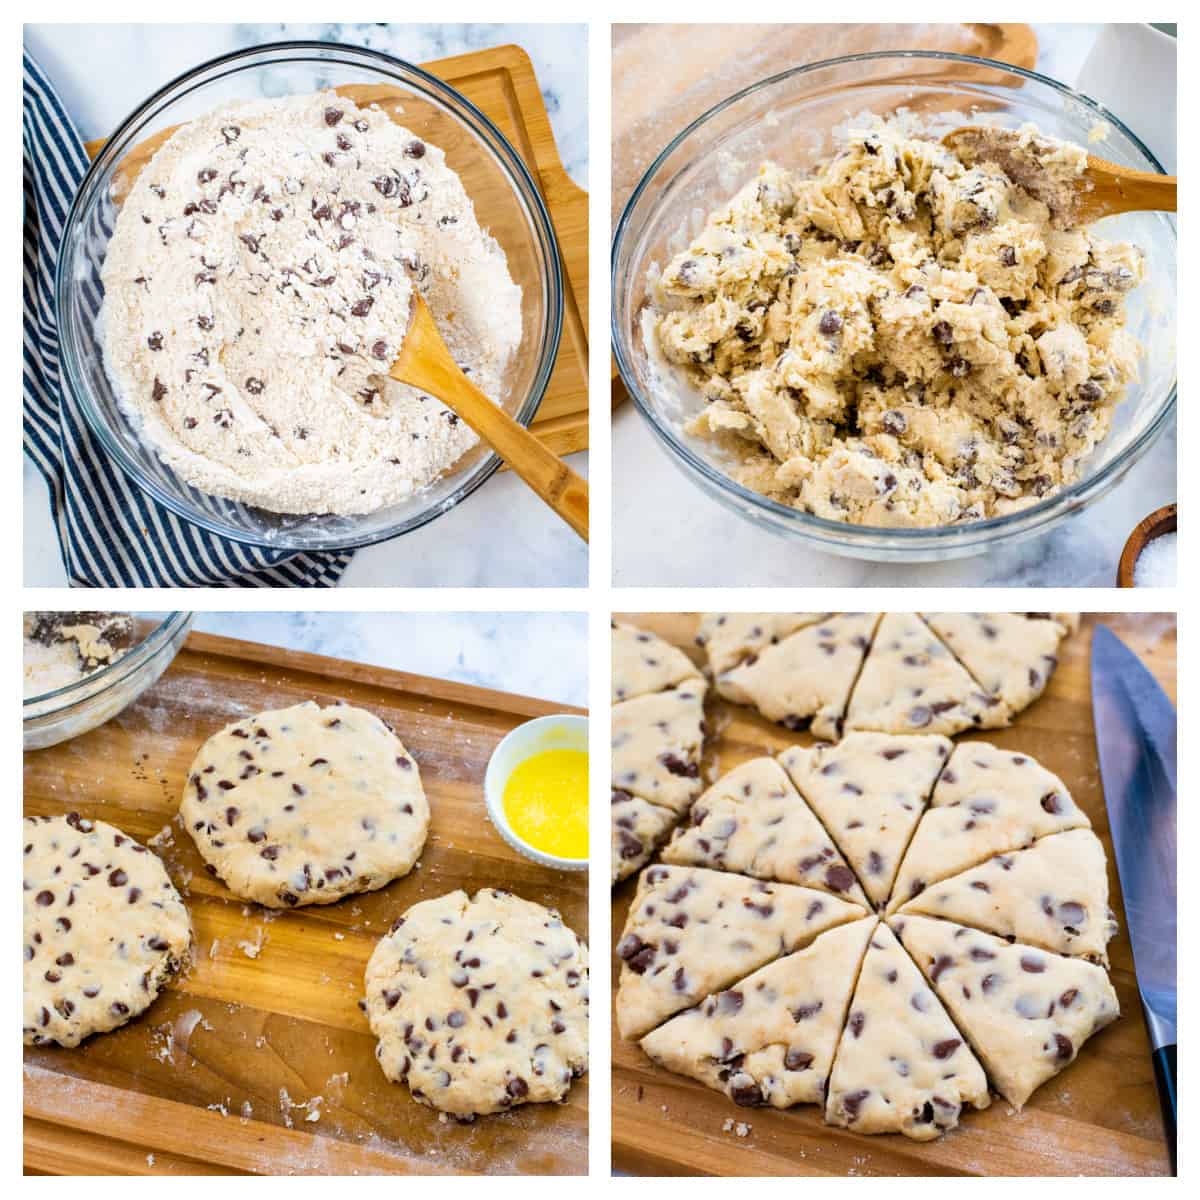 Collage showing how to make chocolate chip scones.